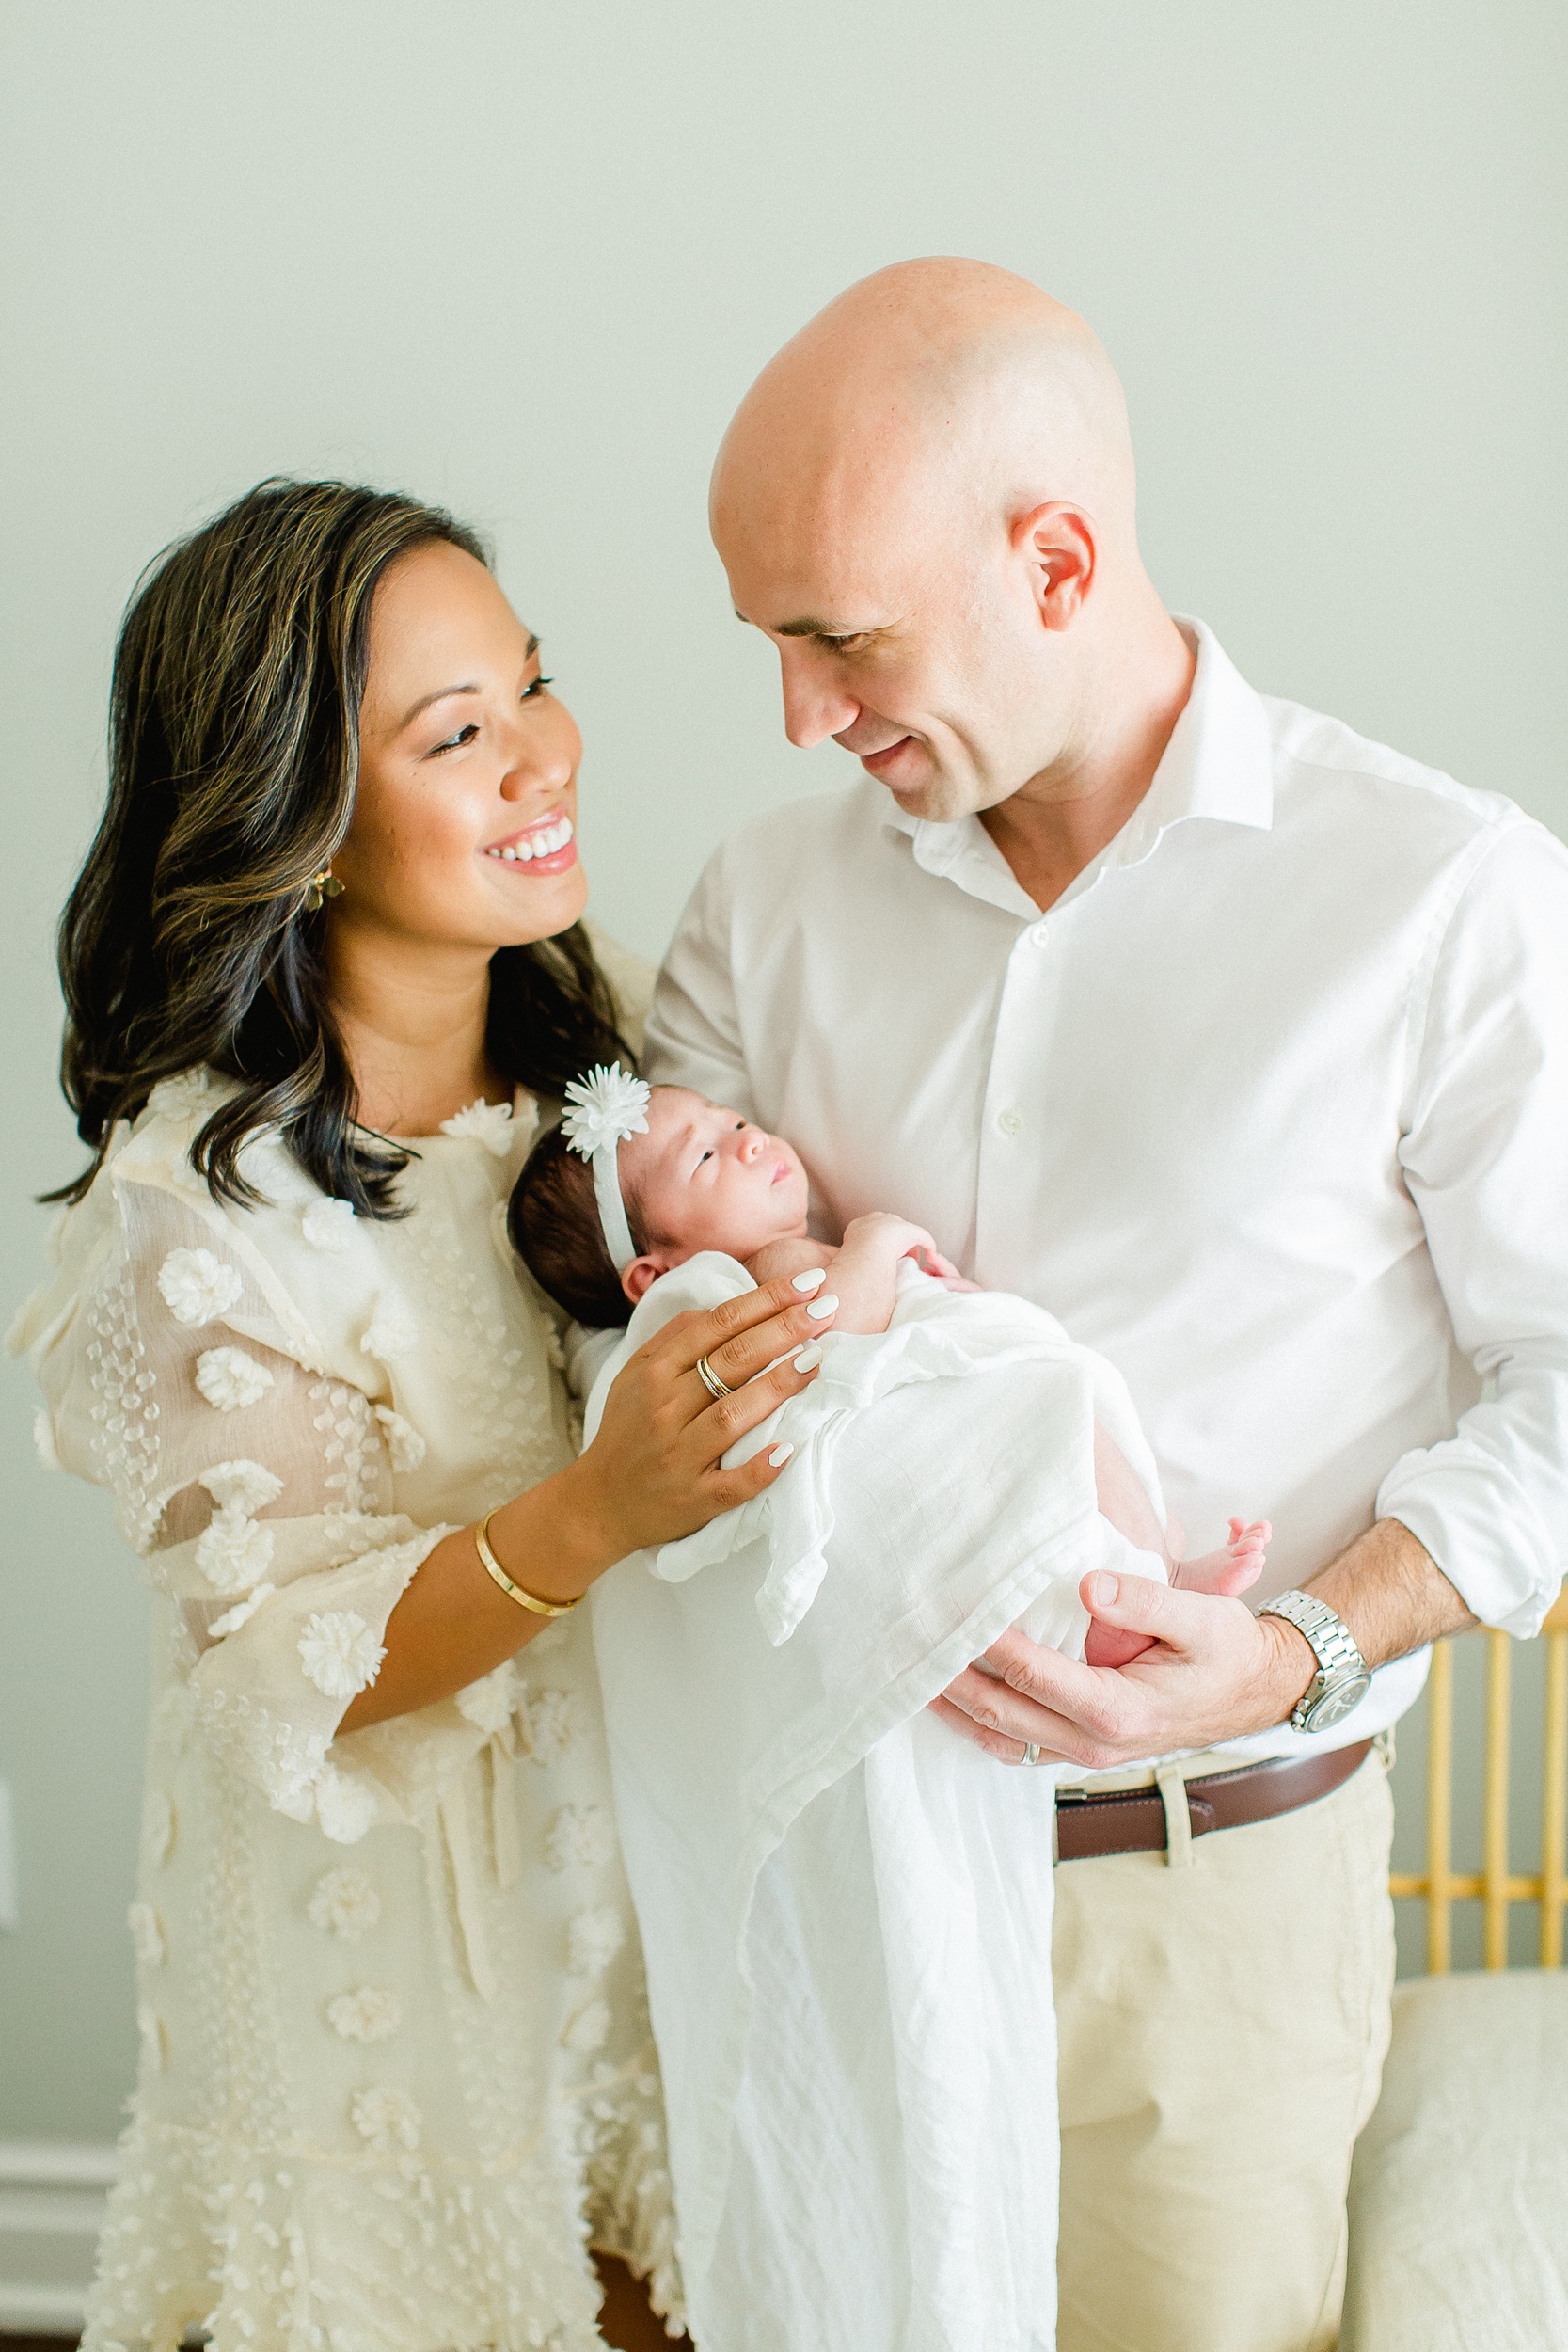 Tampa Family Photographer | © Ailyn La Torre Photography 2020